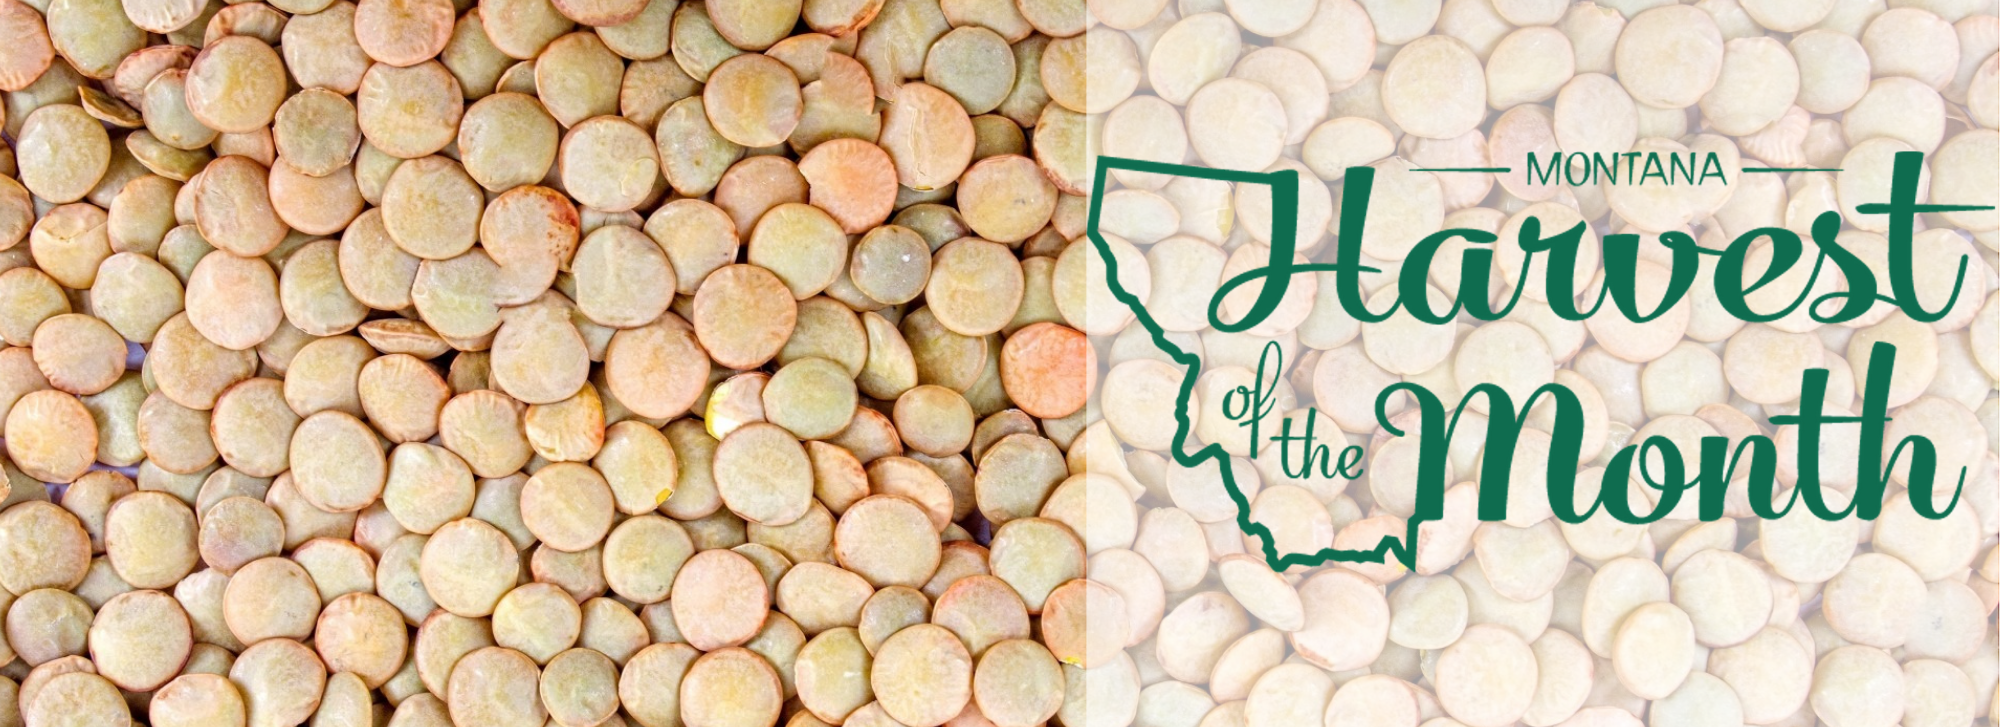 Enjoy lentils as this month's Harvest of the Month!